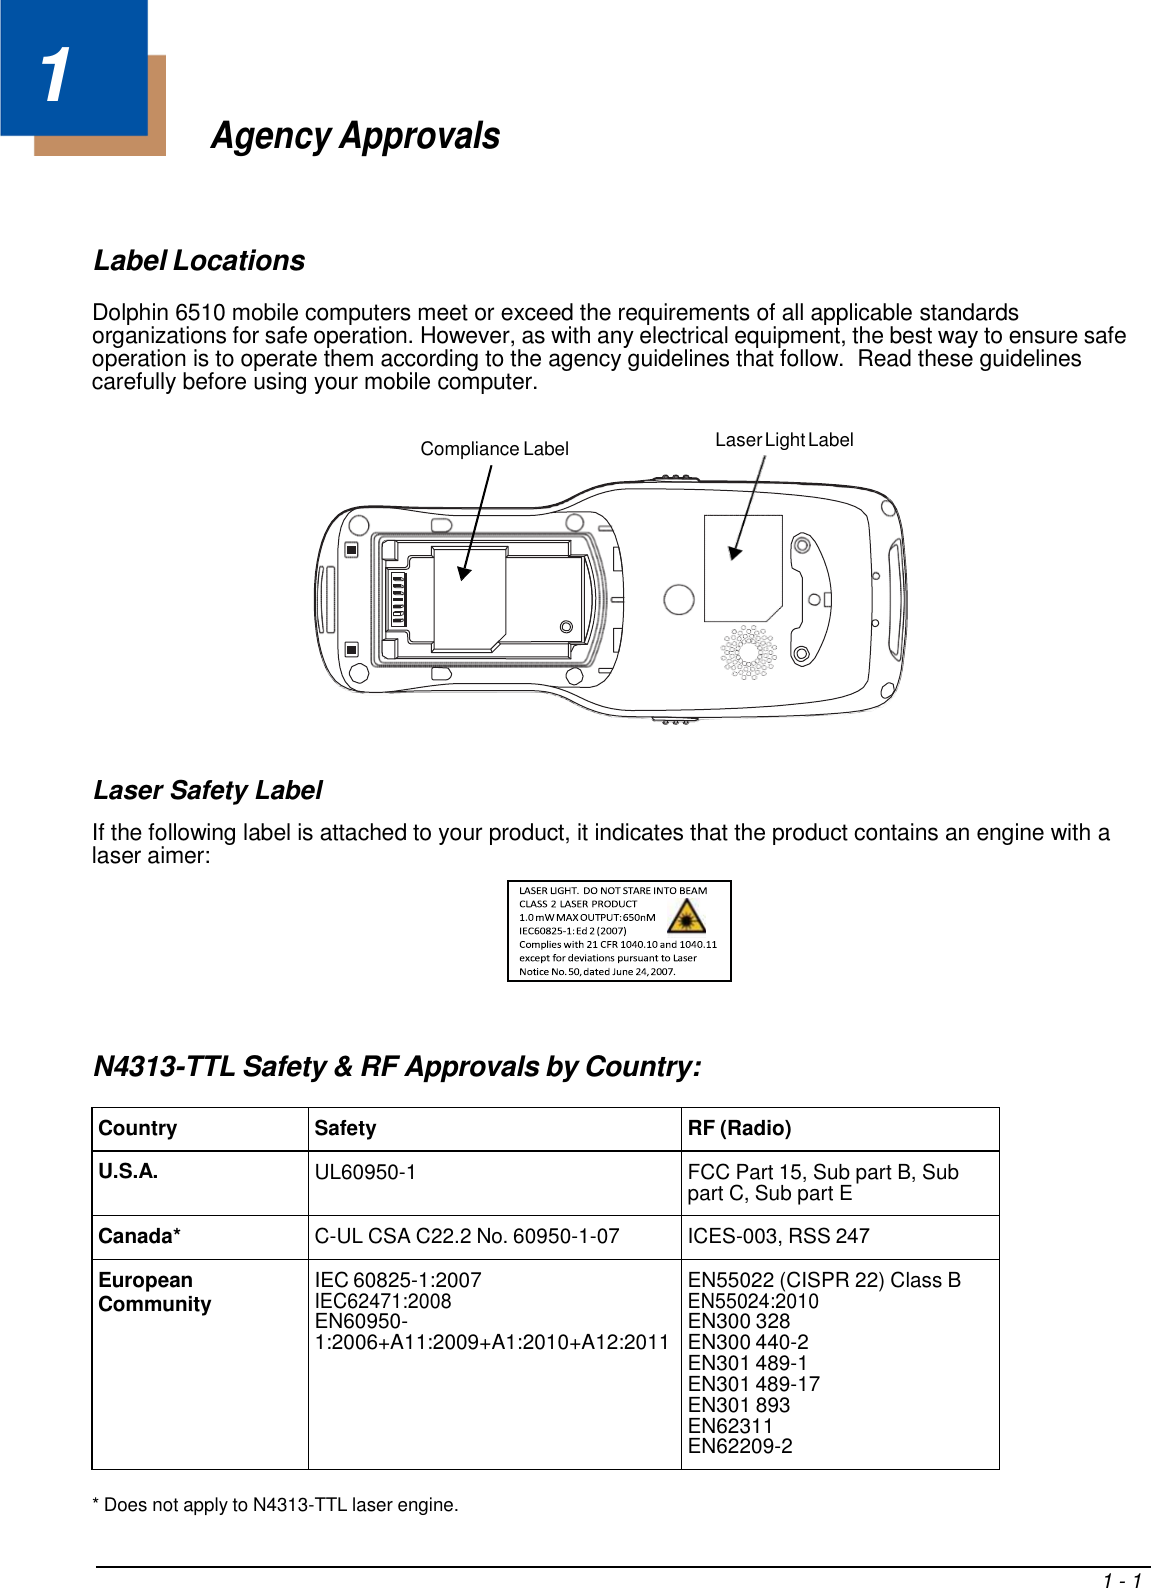 Agency Approvals Label Locations Dolphin 6510 mobile computers meet or exceed the requirements of all applicable standards organizations for safe operation. However, as with any electrical equipment, the best way to ensure safe operation is to operate them according to the agency guidelines that follow.  Read these guidelines carefully before using your mobile computer. Laser Safety Label If the following label is attached to your product, it indicates that the product contains an engine with a laser aimer: N4313-TTL Safety &amp; RF Approvals by Country: Country Safety RF (Radio) U.S.A. UL60950-1  FCC Part 15, Sub part B, Sub part C, Sub part E Canada* C-UL CSA C22.2 No. 60950-1-07 ICES-003, RSS 247 European  IEC 60825-1:2007  EN55022 (CISPR 22) Class B Community IEC62471:2008 EN60950- EN55024:2010 EN300 328 1:2006+A11:2009+A1:2010+A12:2011  EN300 440-2 EN301 489-1 EN301 489-17 EN301 893 EN62311 EN62209-2 * Does not apply to N4313-TTL laser engine.1 - 1 Compliance Label  Laser Light Label 1 